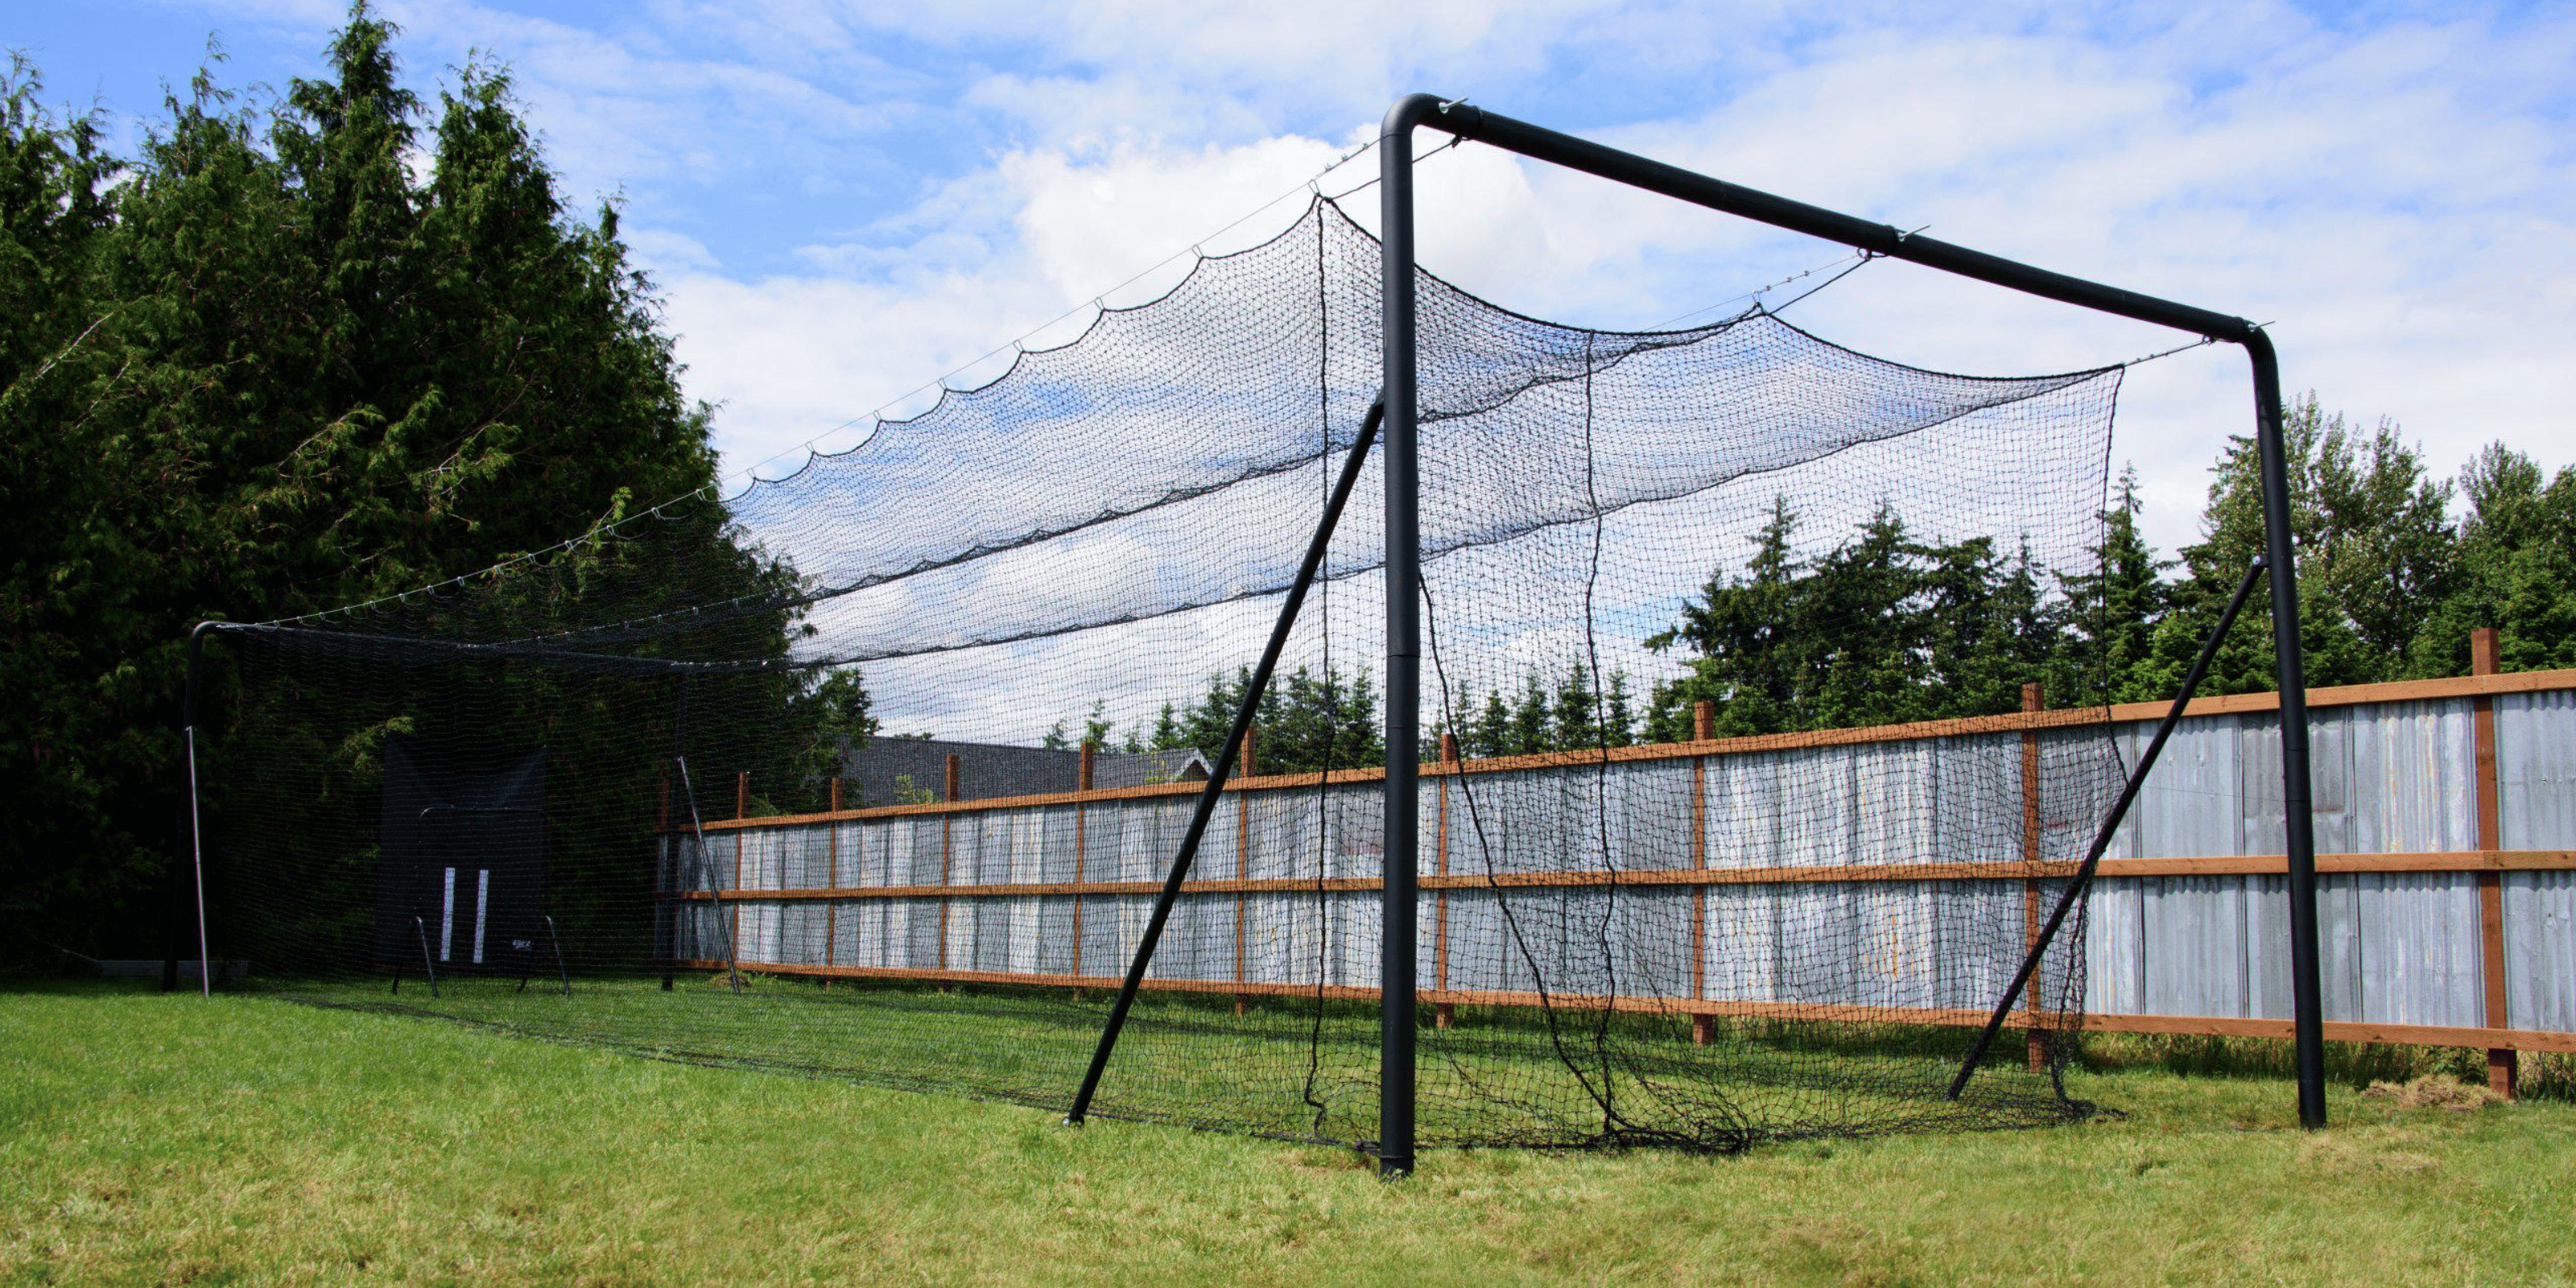 Iron Horse batting cage in a backyard with a fence, trees, and blue skies